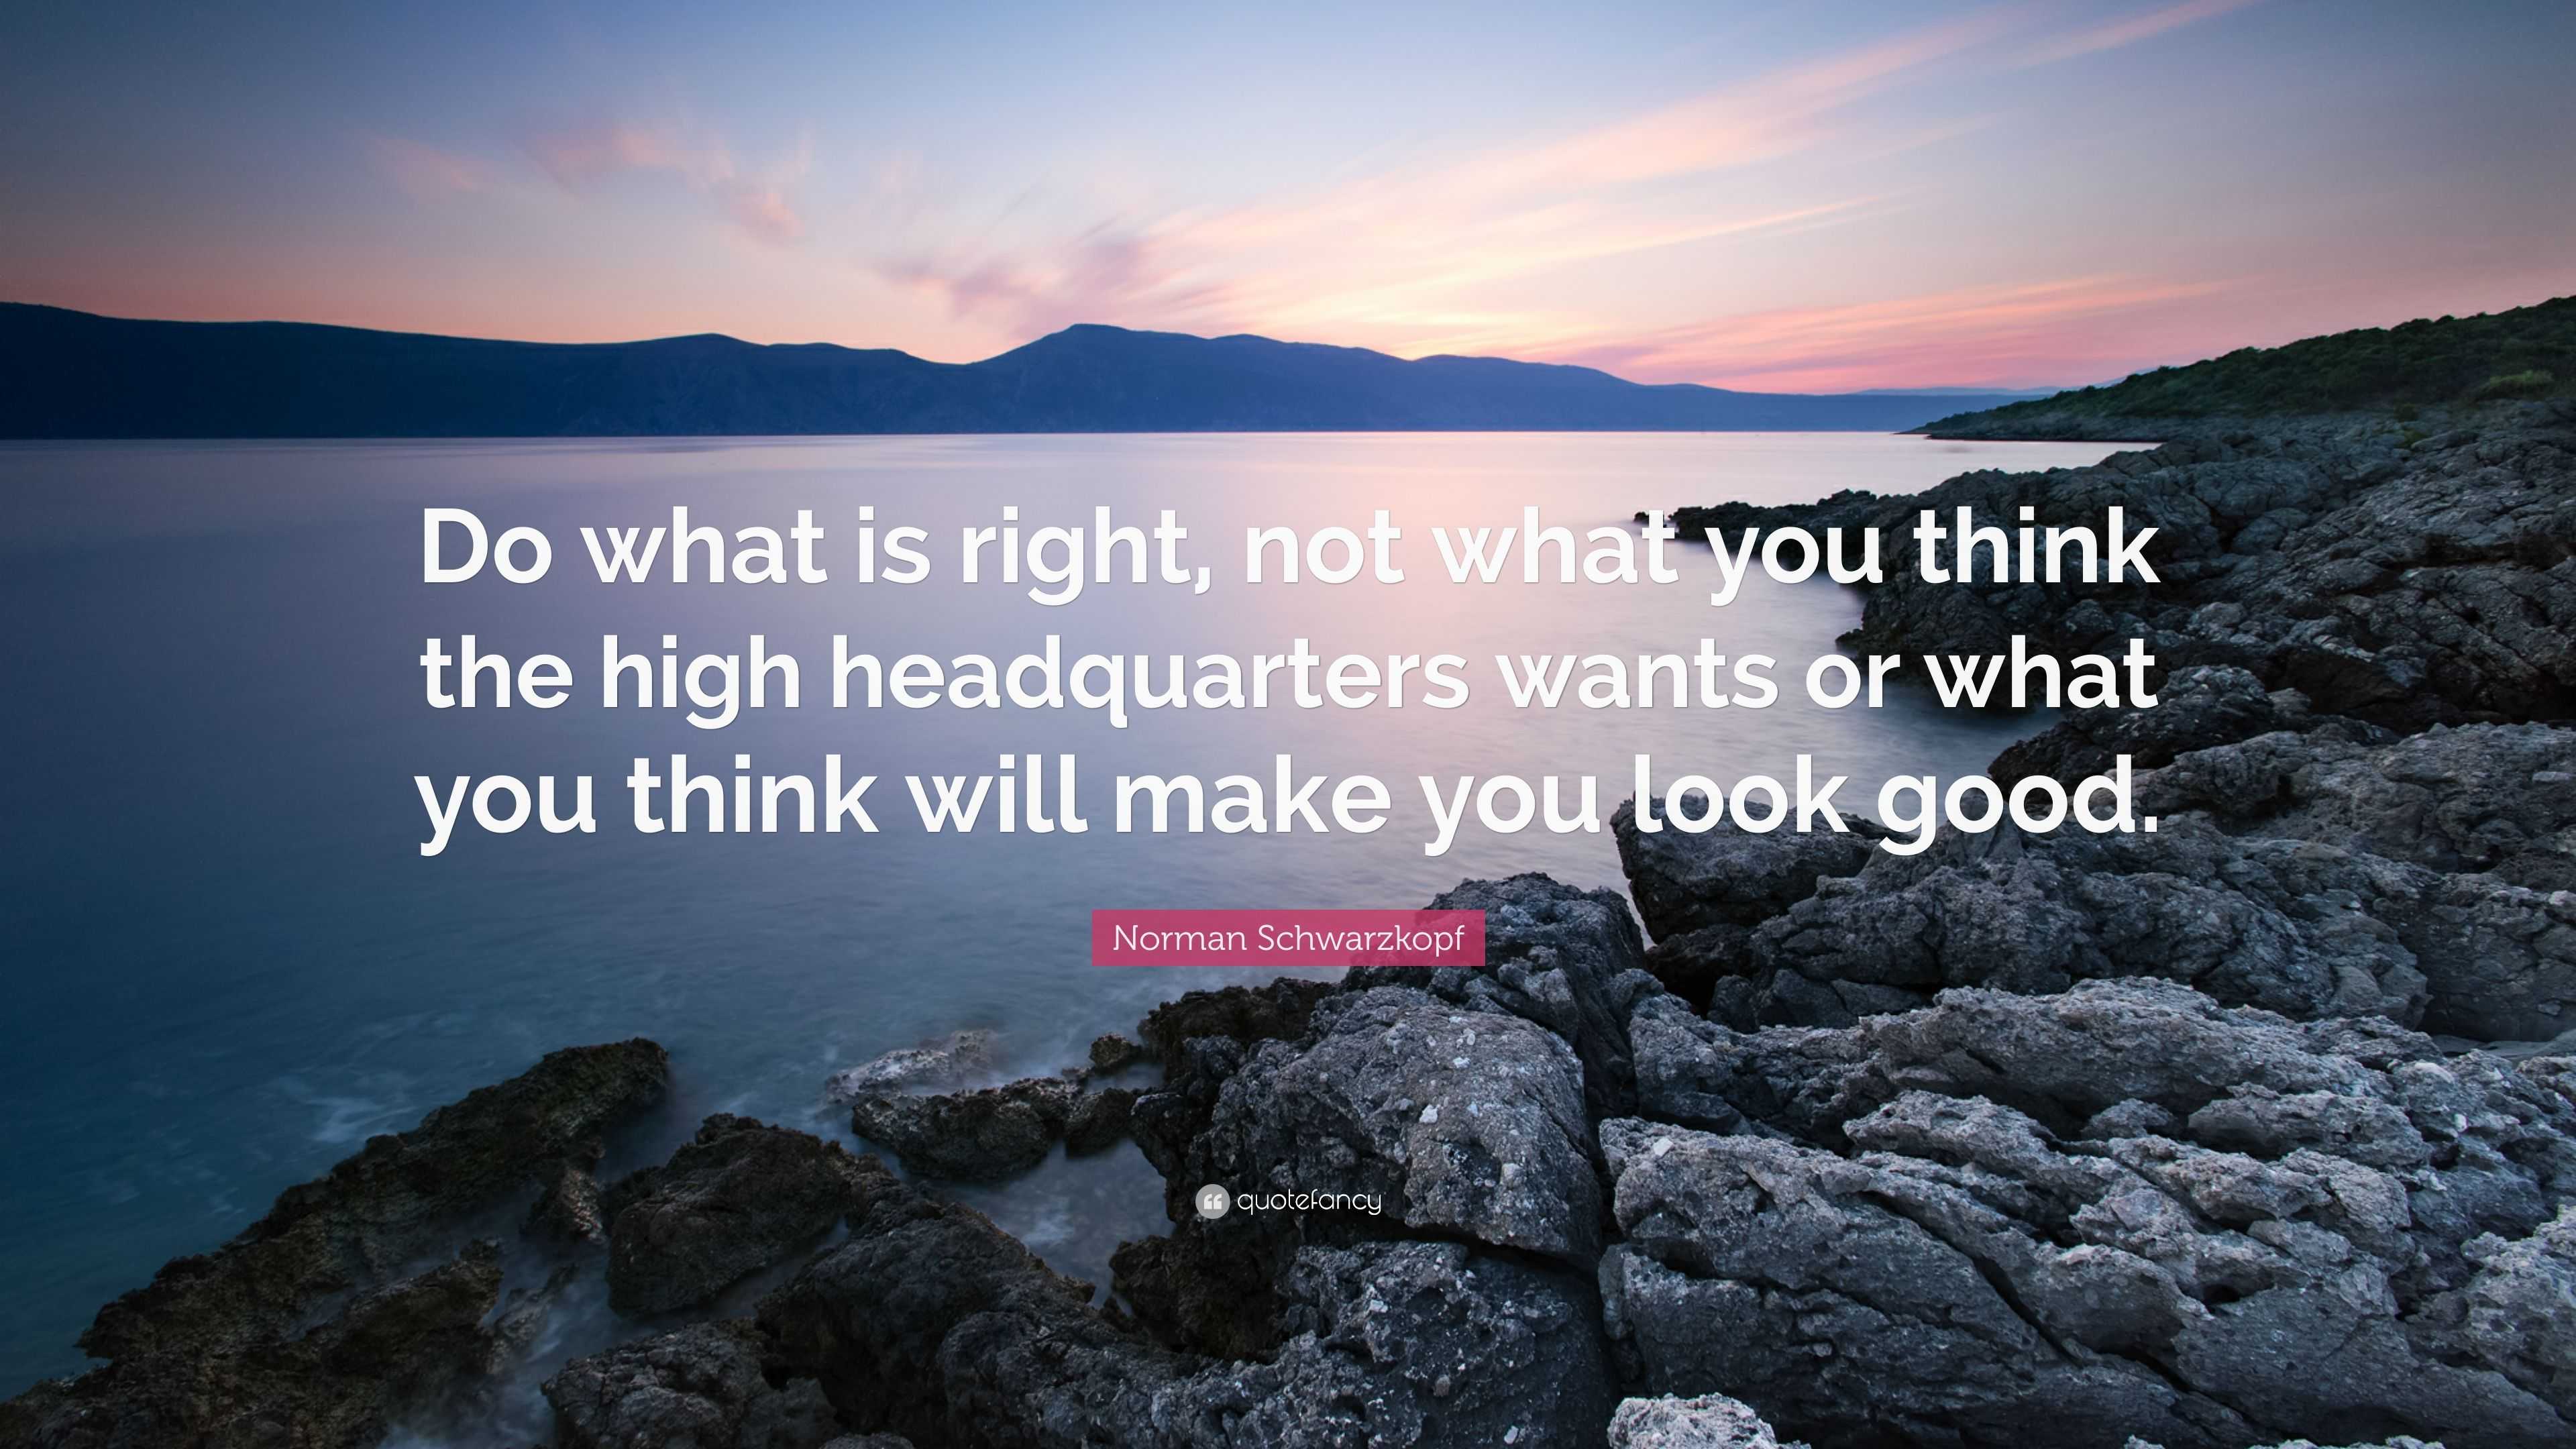 Norman Schwarzkopf Quote: “Do what is right